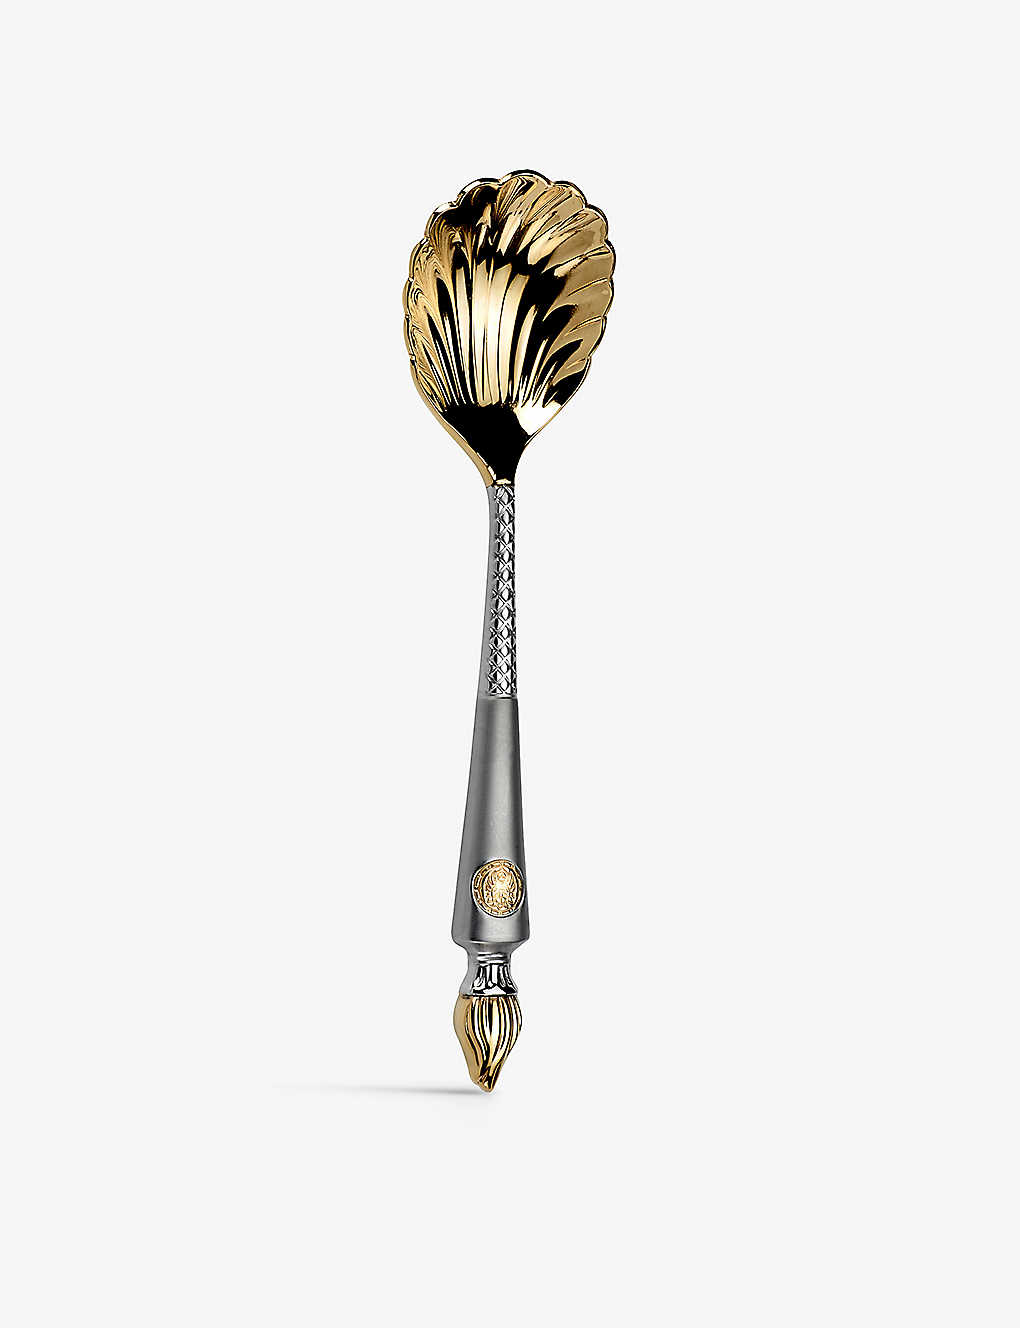 Arthur Price Silver Plated Empire Flame Stainless-steel Caviar Spoon